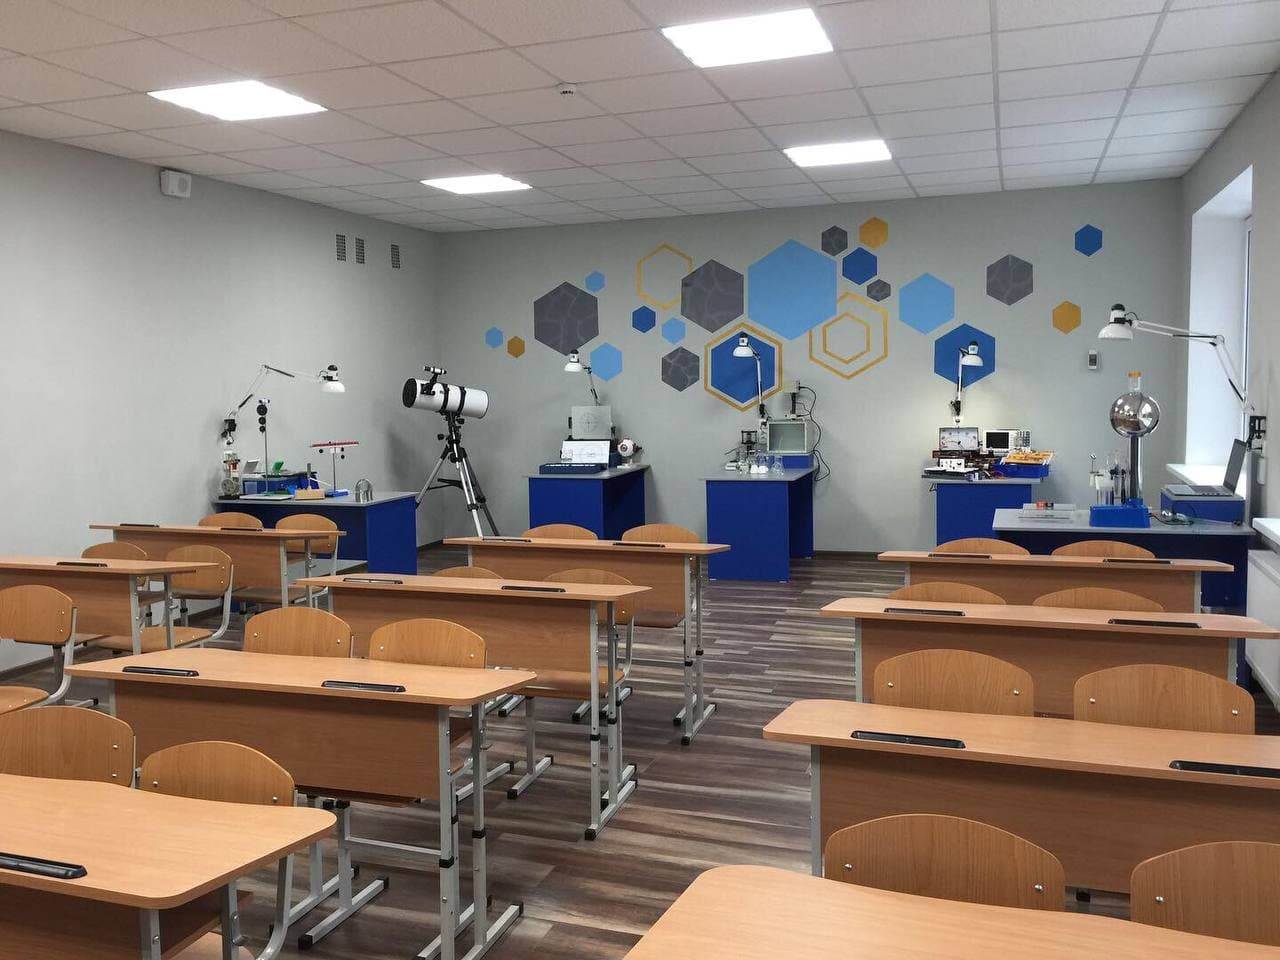 Physics room and refurbished food court at the Tereshky Lyceum